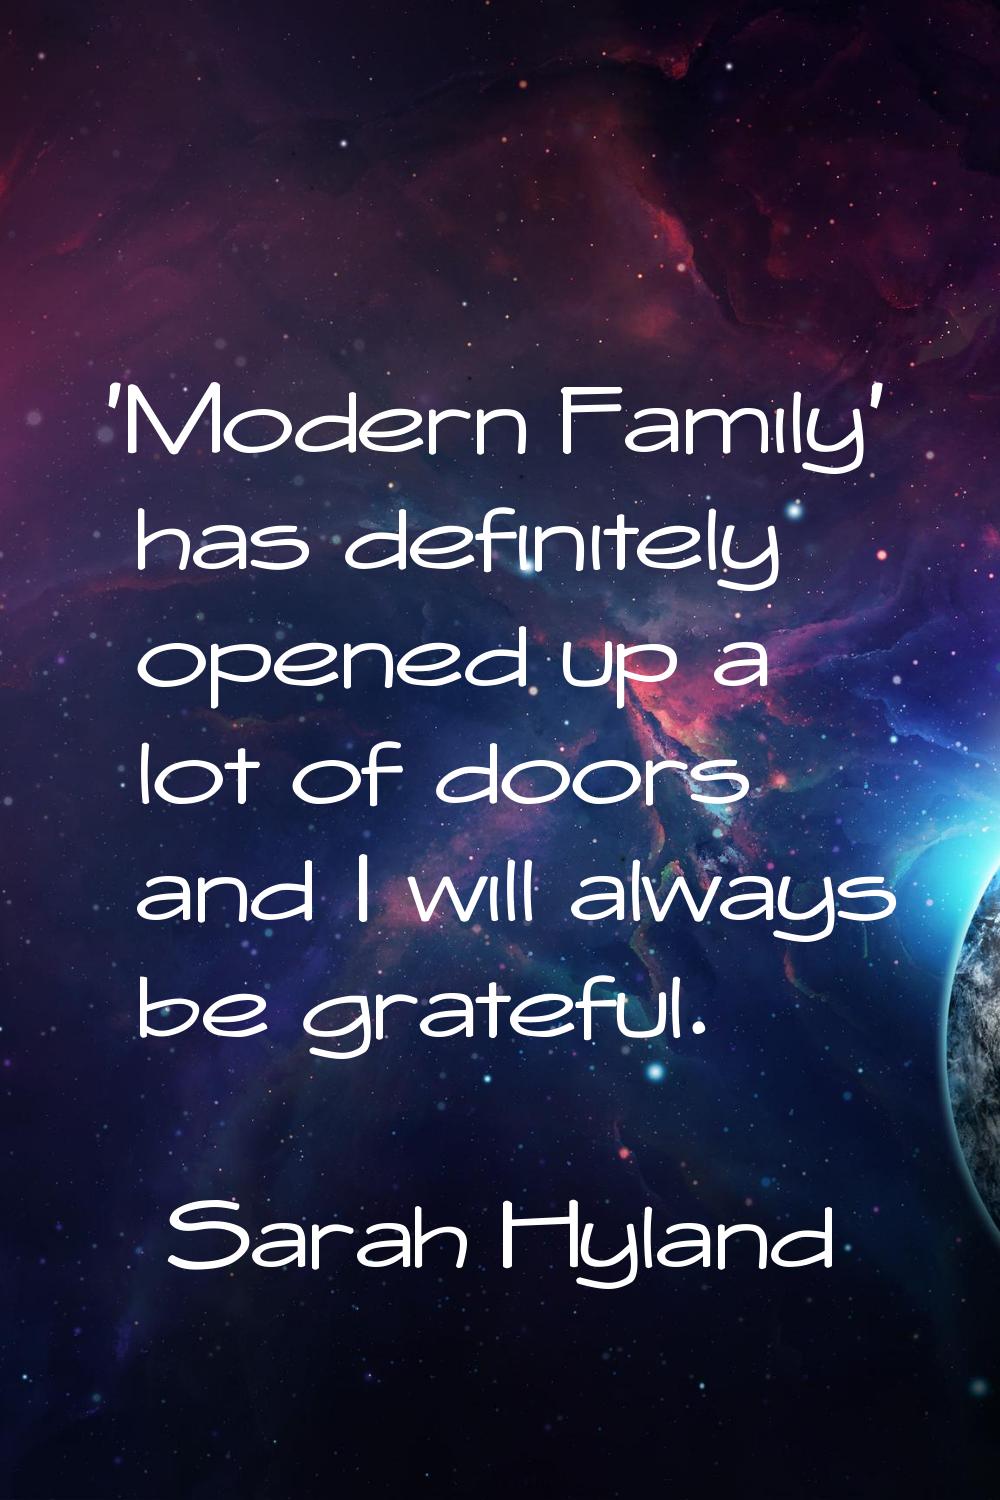 'Modern Family' has definitely opened up a lot of doors and I will always be grateful.